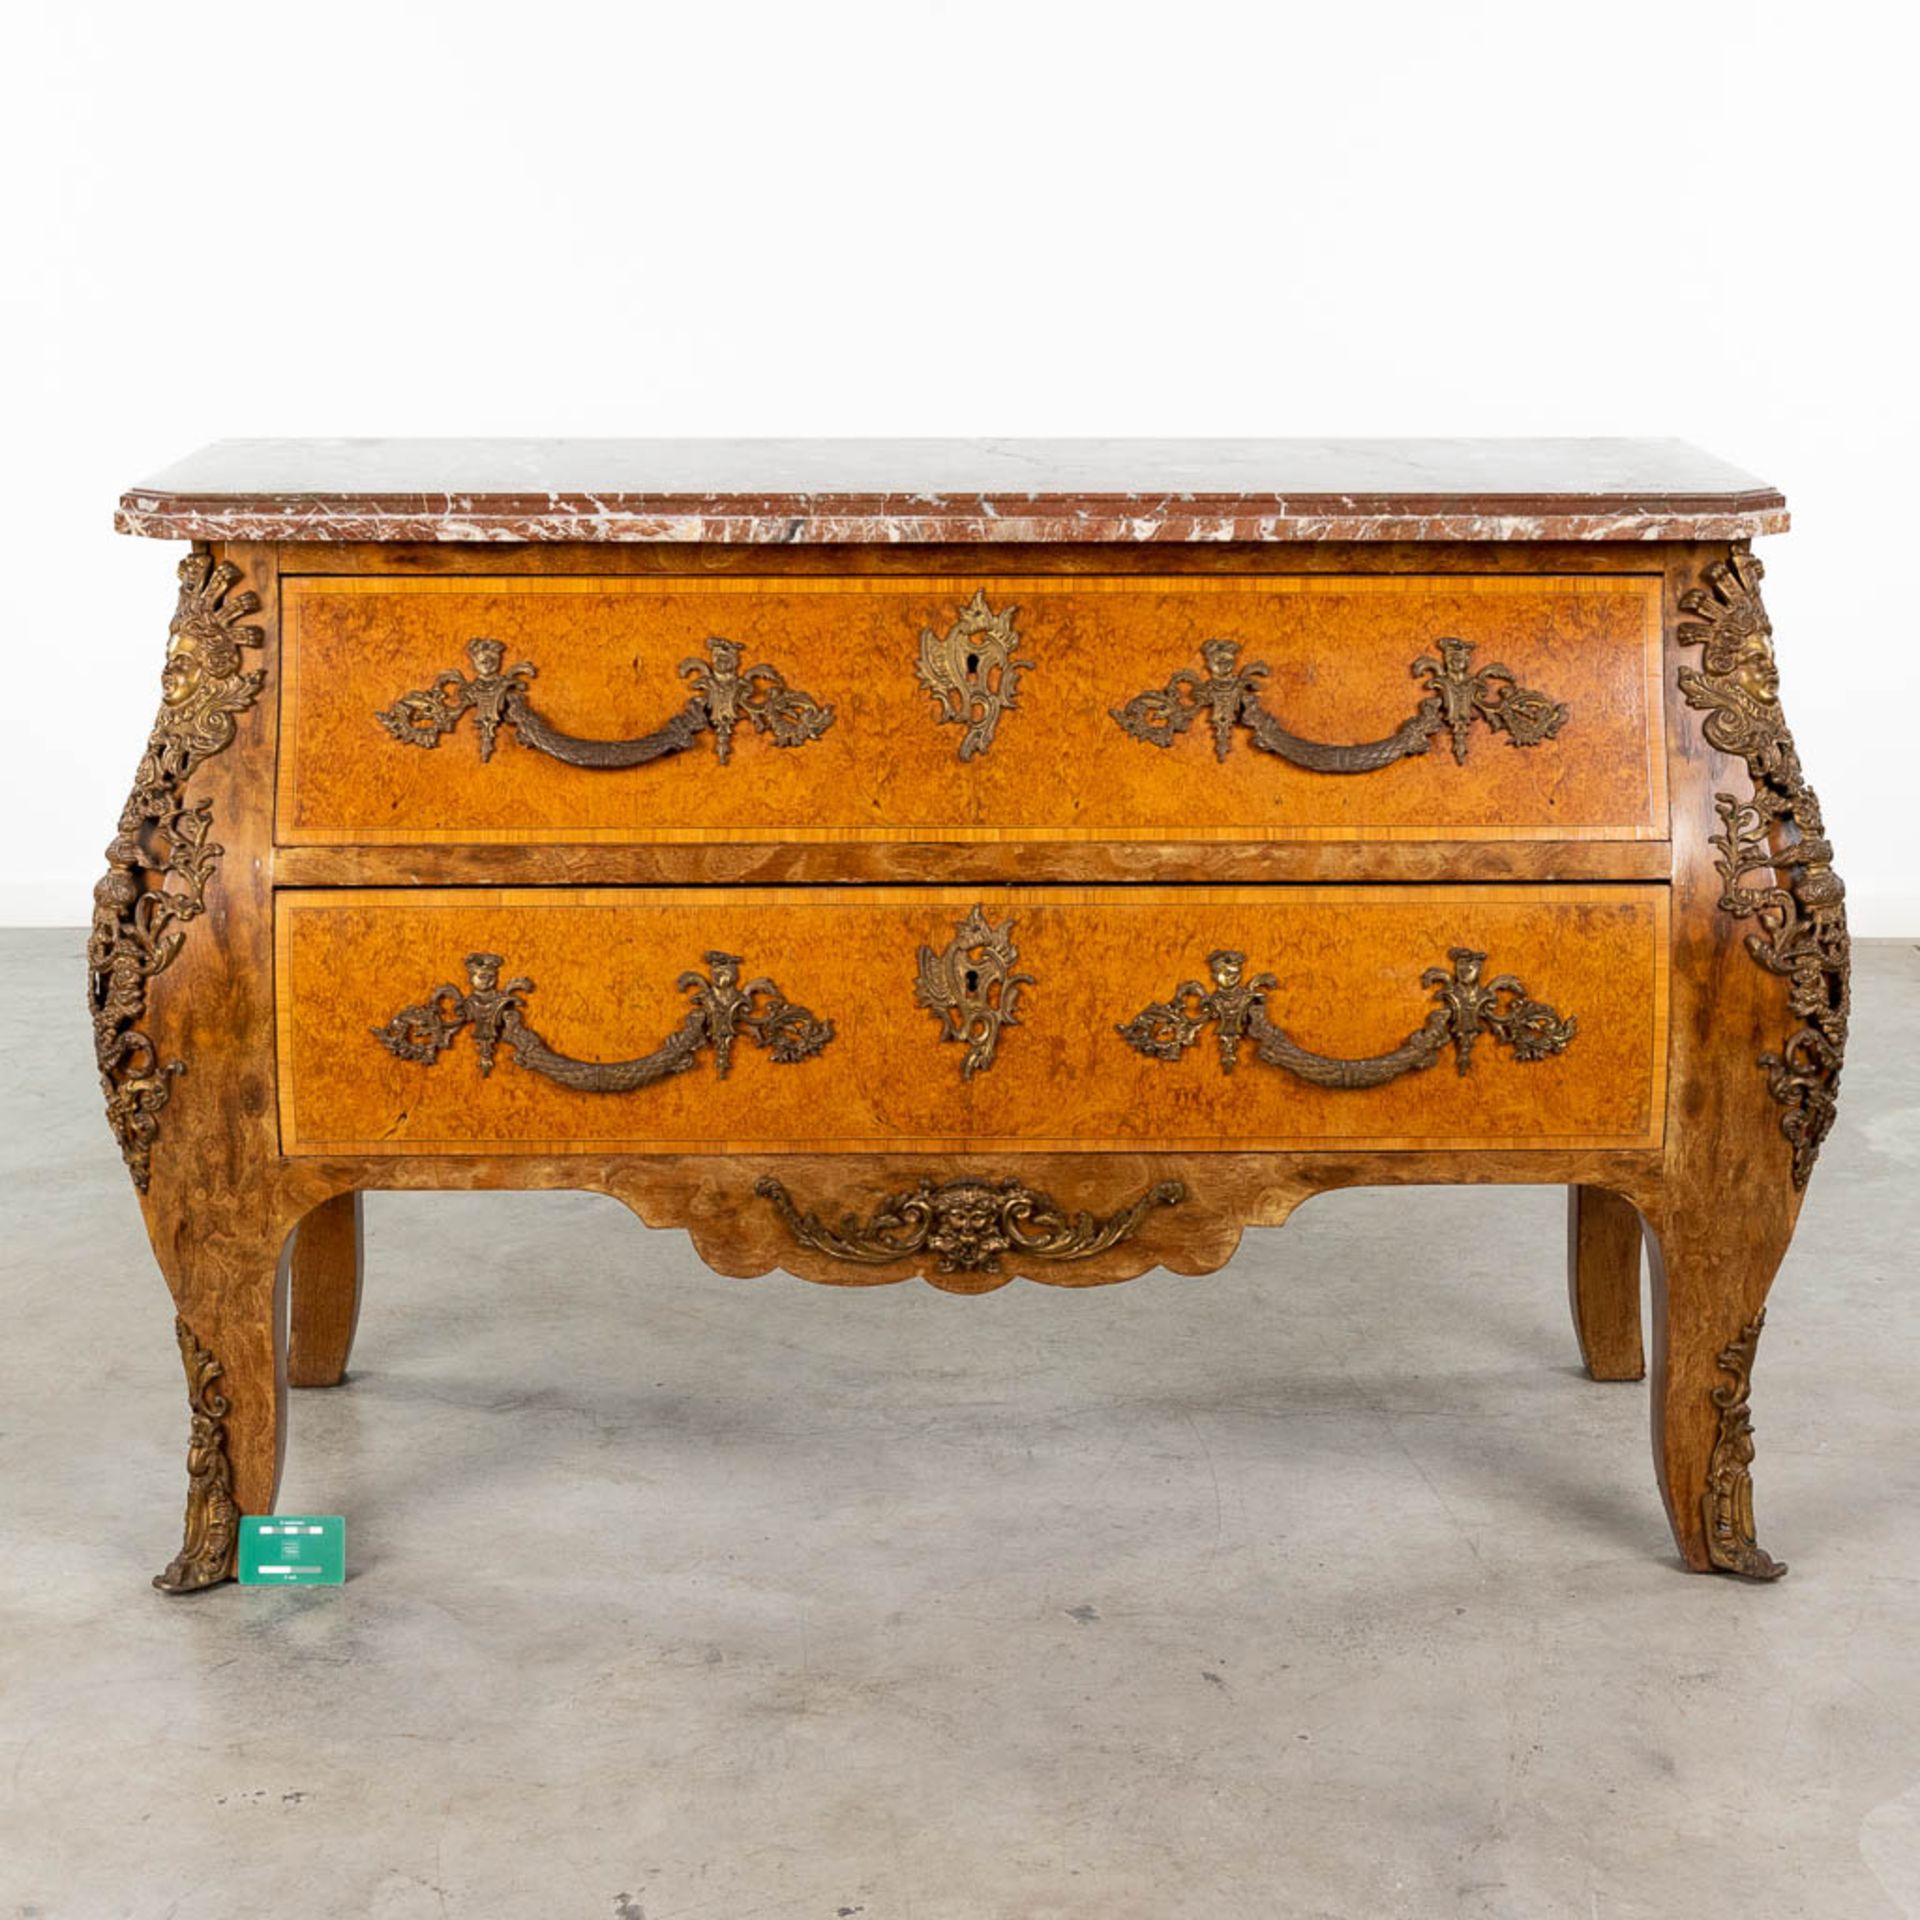 A two-drawer commode mounted with bronze and a marble top. 20th C. (L: 55 x W: 132 x H: 88 cm) - Image 2 of 19